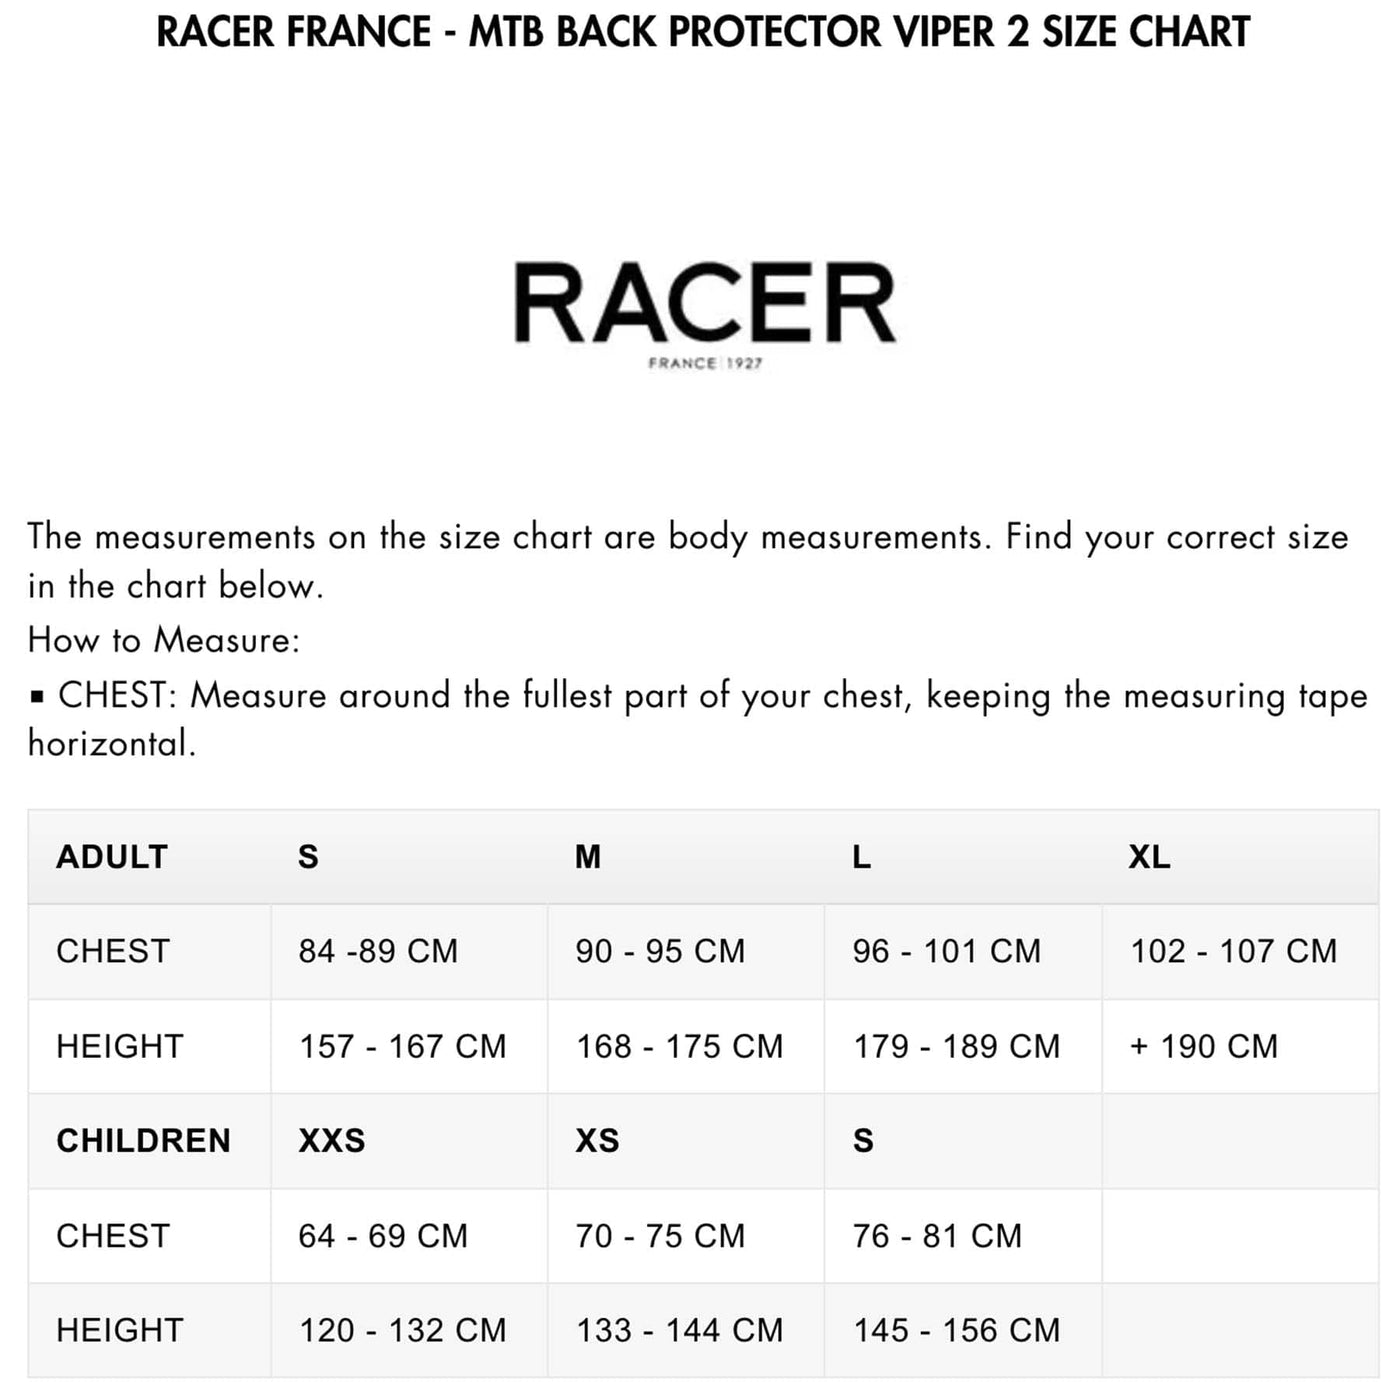 RACER France Youth MTB Back Protector - Viper 2 8Lines Shop - Fast Shipping